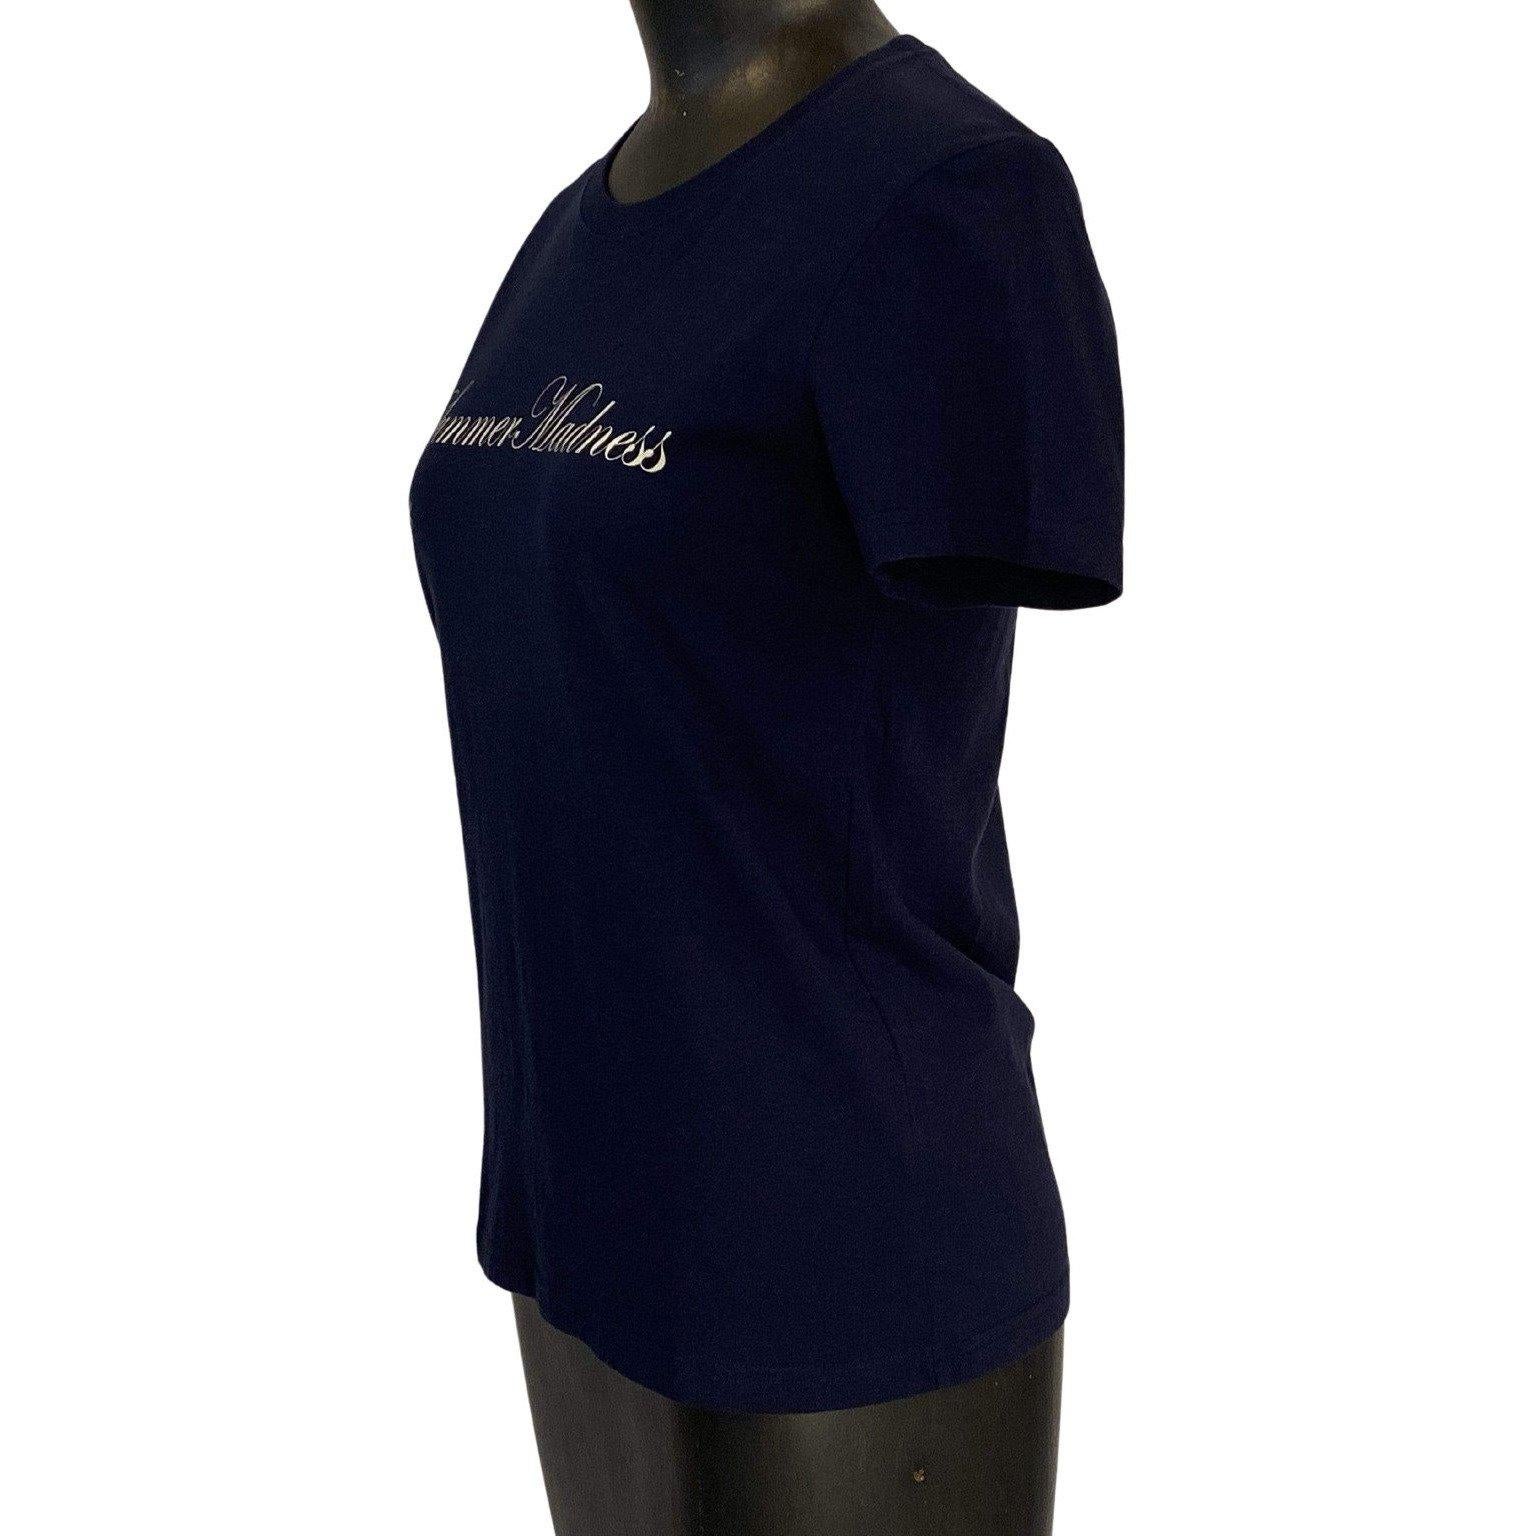 This vintage Undercover tee is 100% cotton. The deep navy blue is a good base for the feminine white font proclaiming 